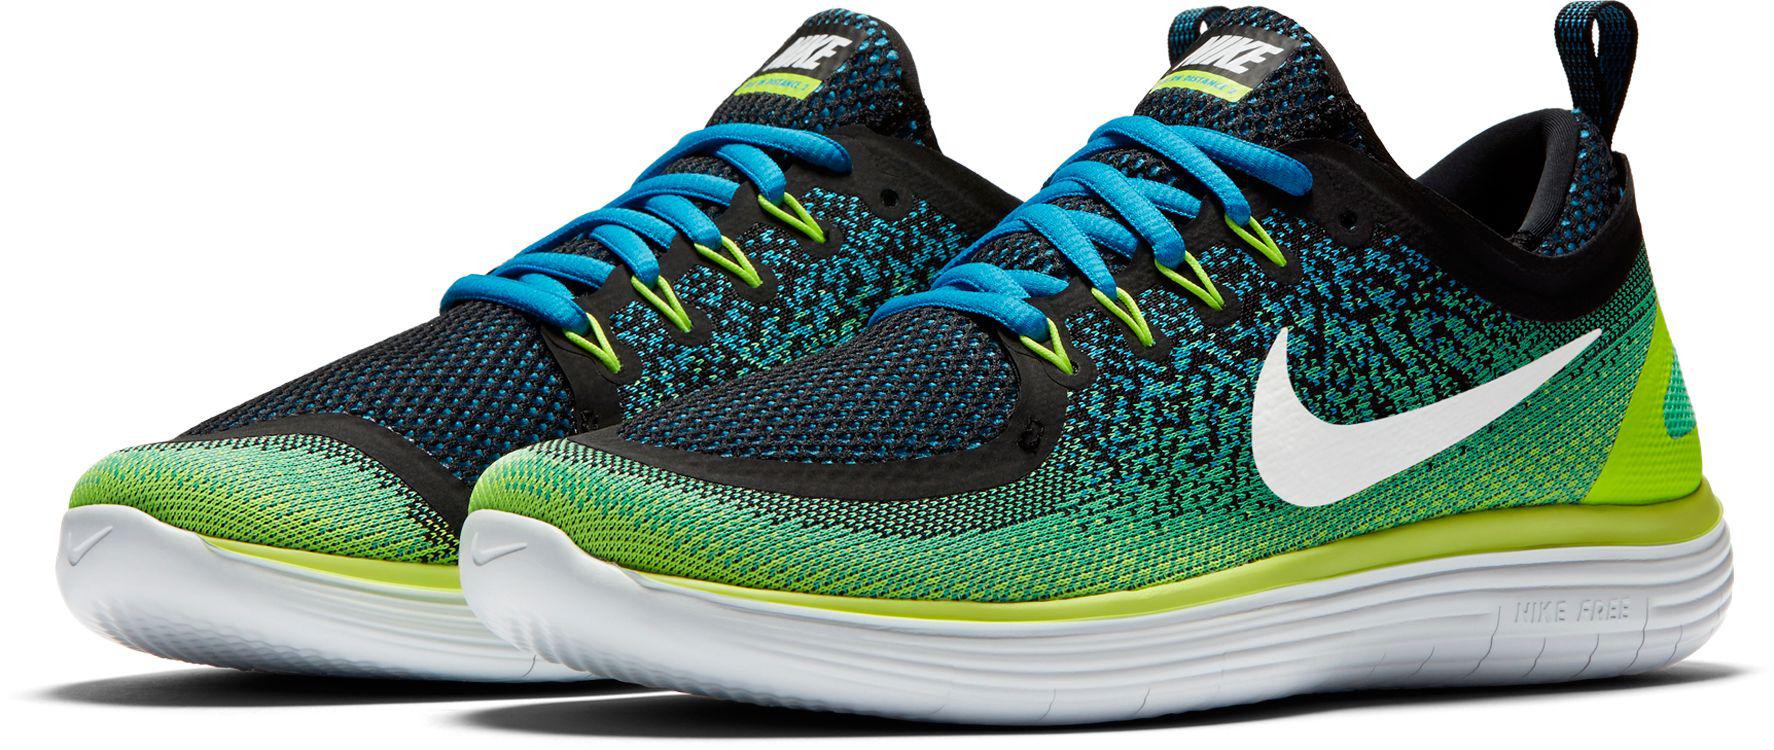 Nike Rubber Free Rn Distance 2 Running Shoes in Green/Navy